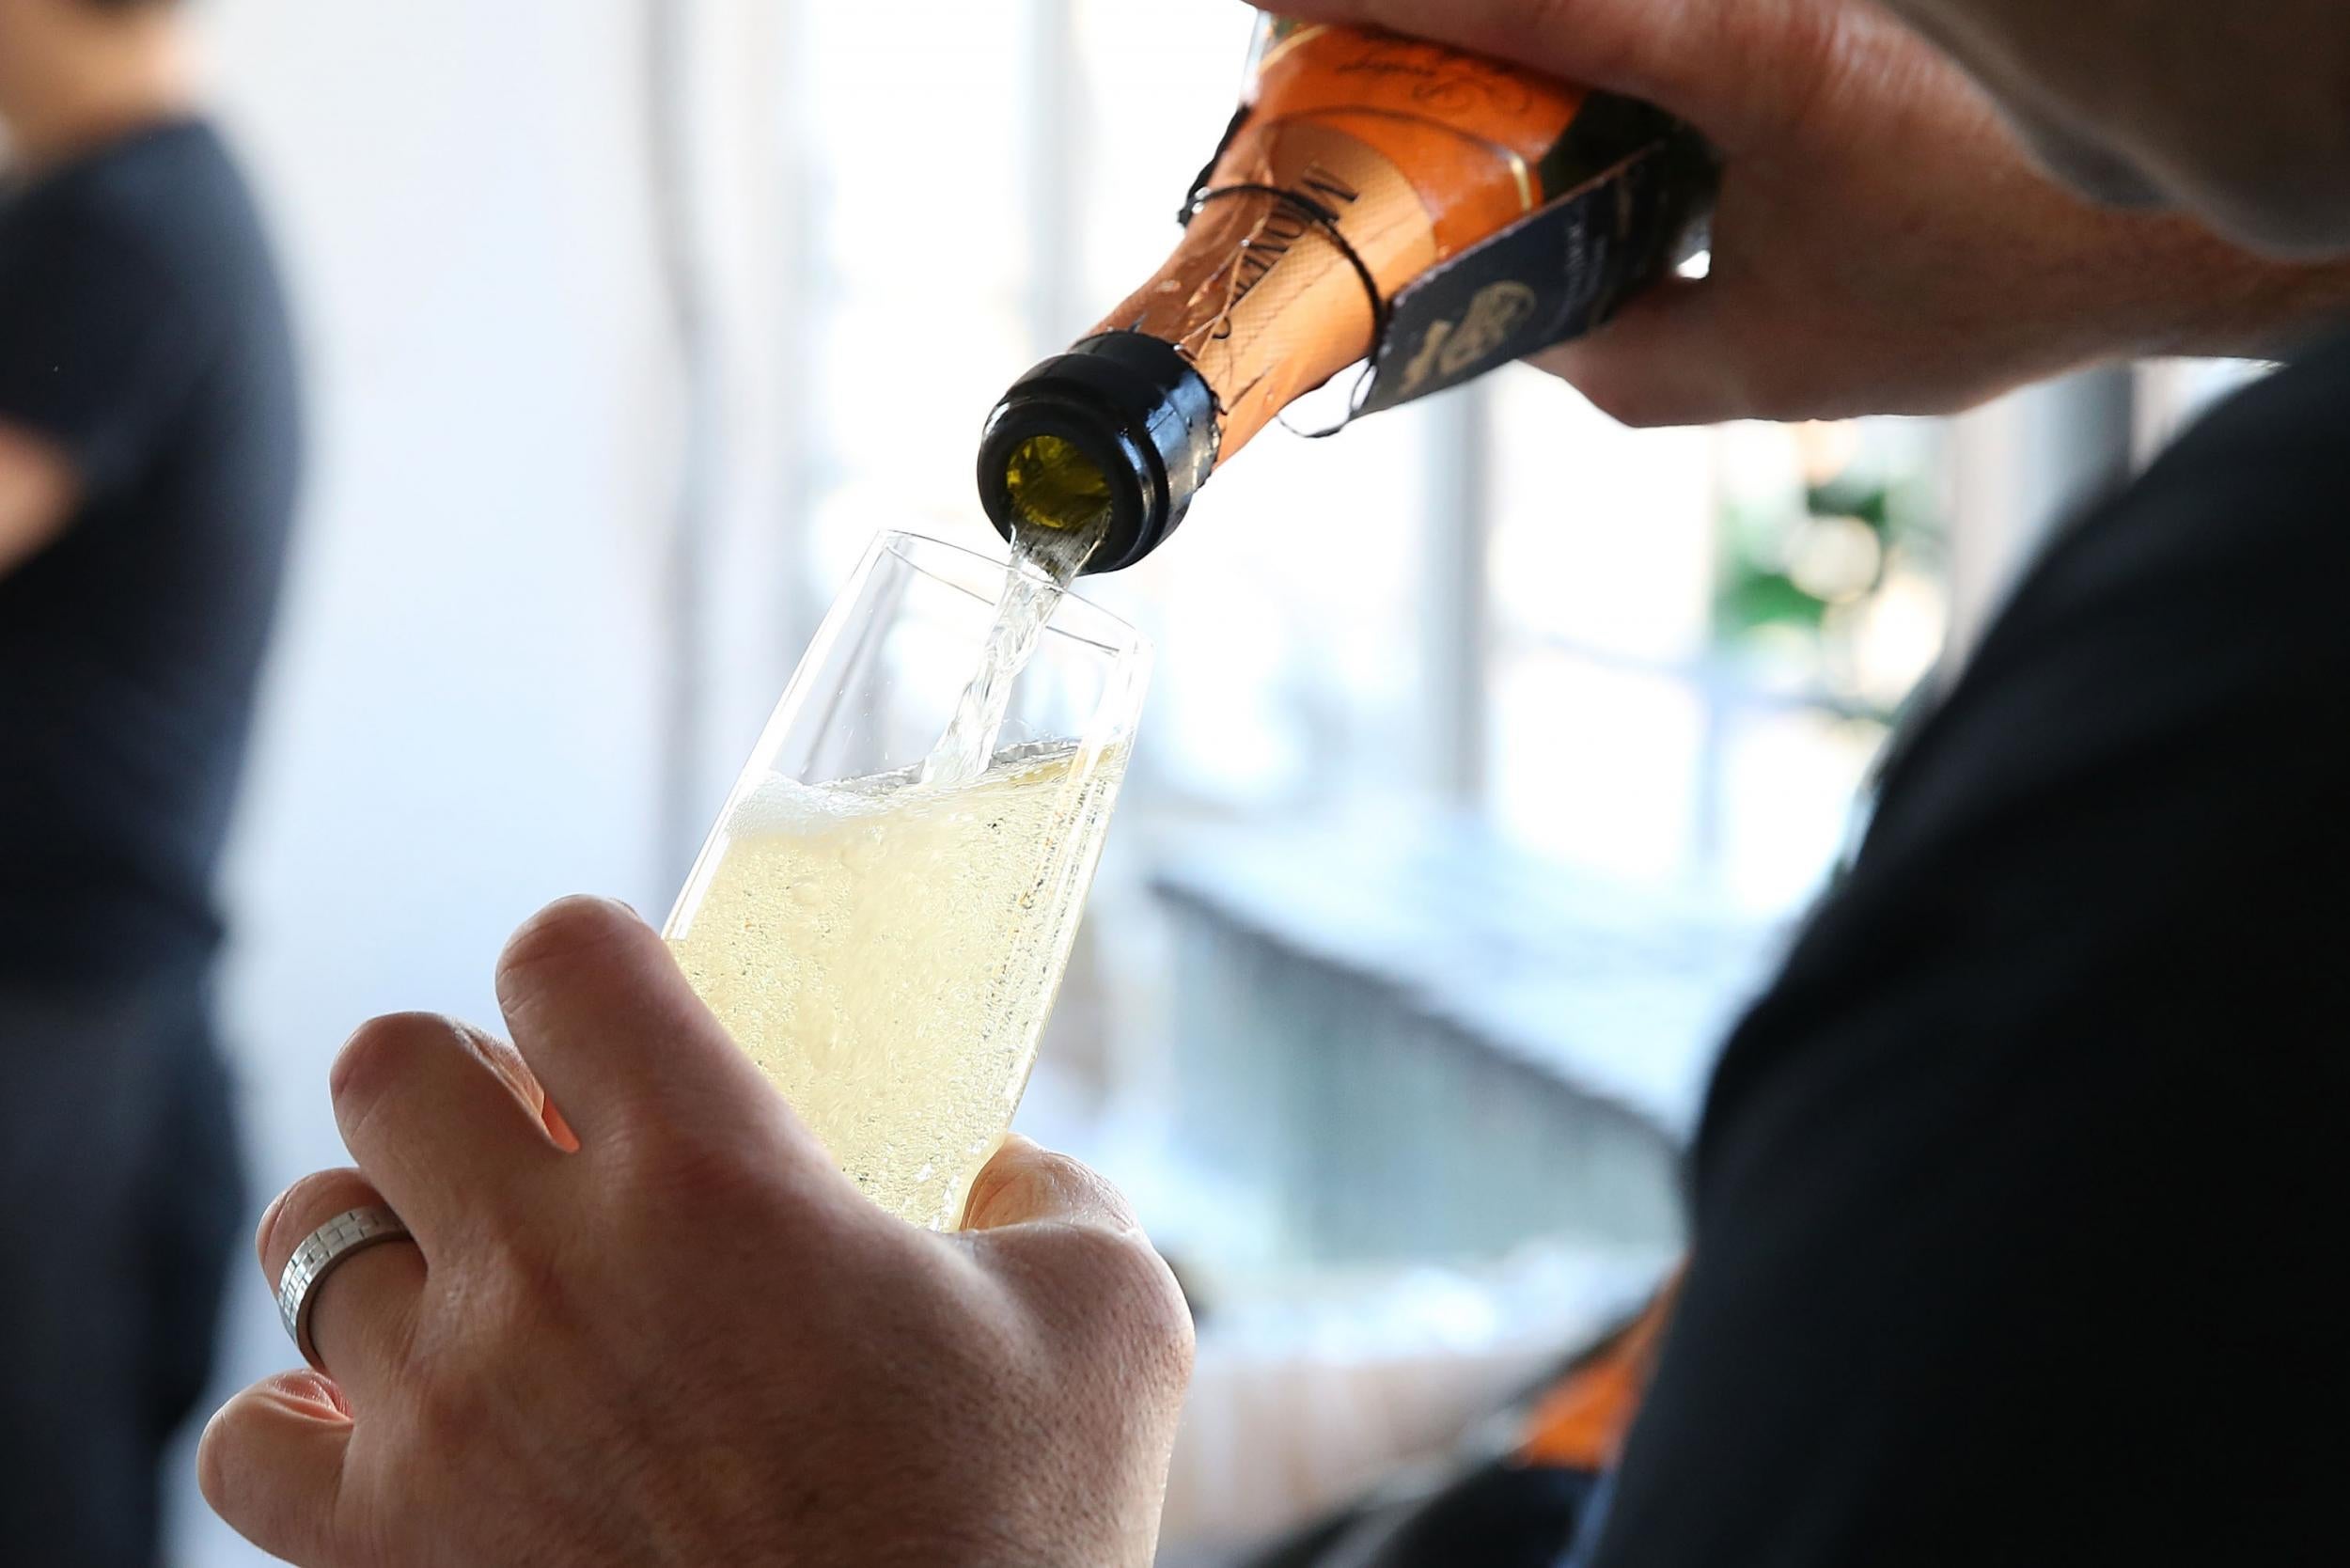 The UK increased its prosecco consumption by 48 per cent between 2014 and 2015